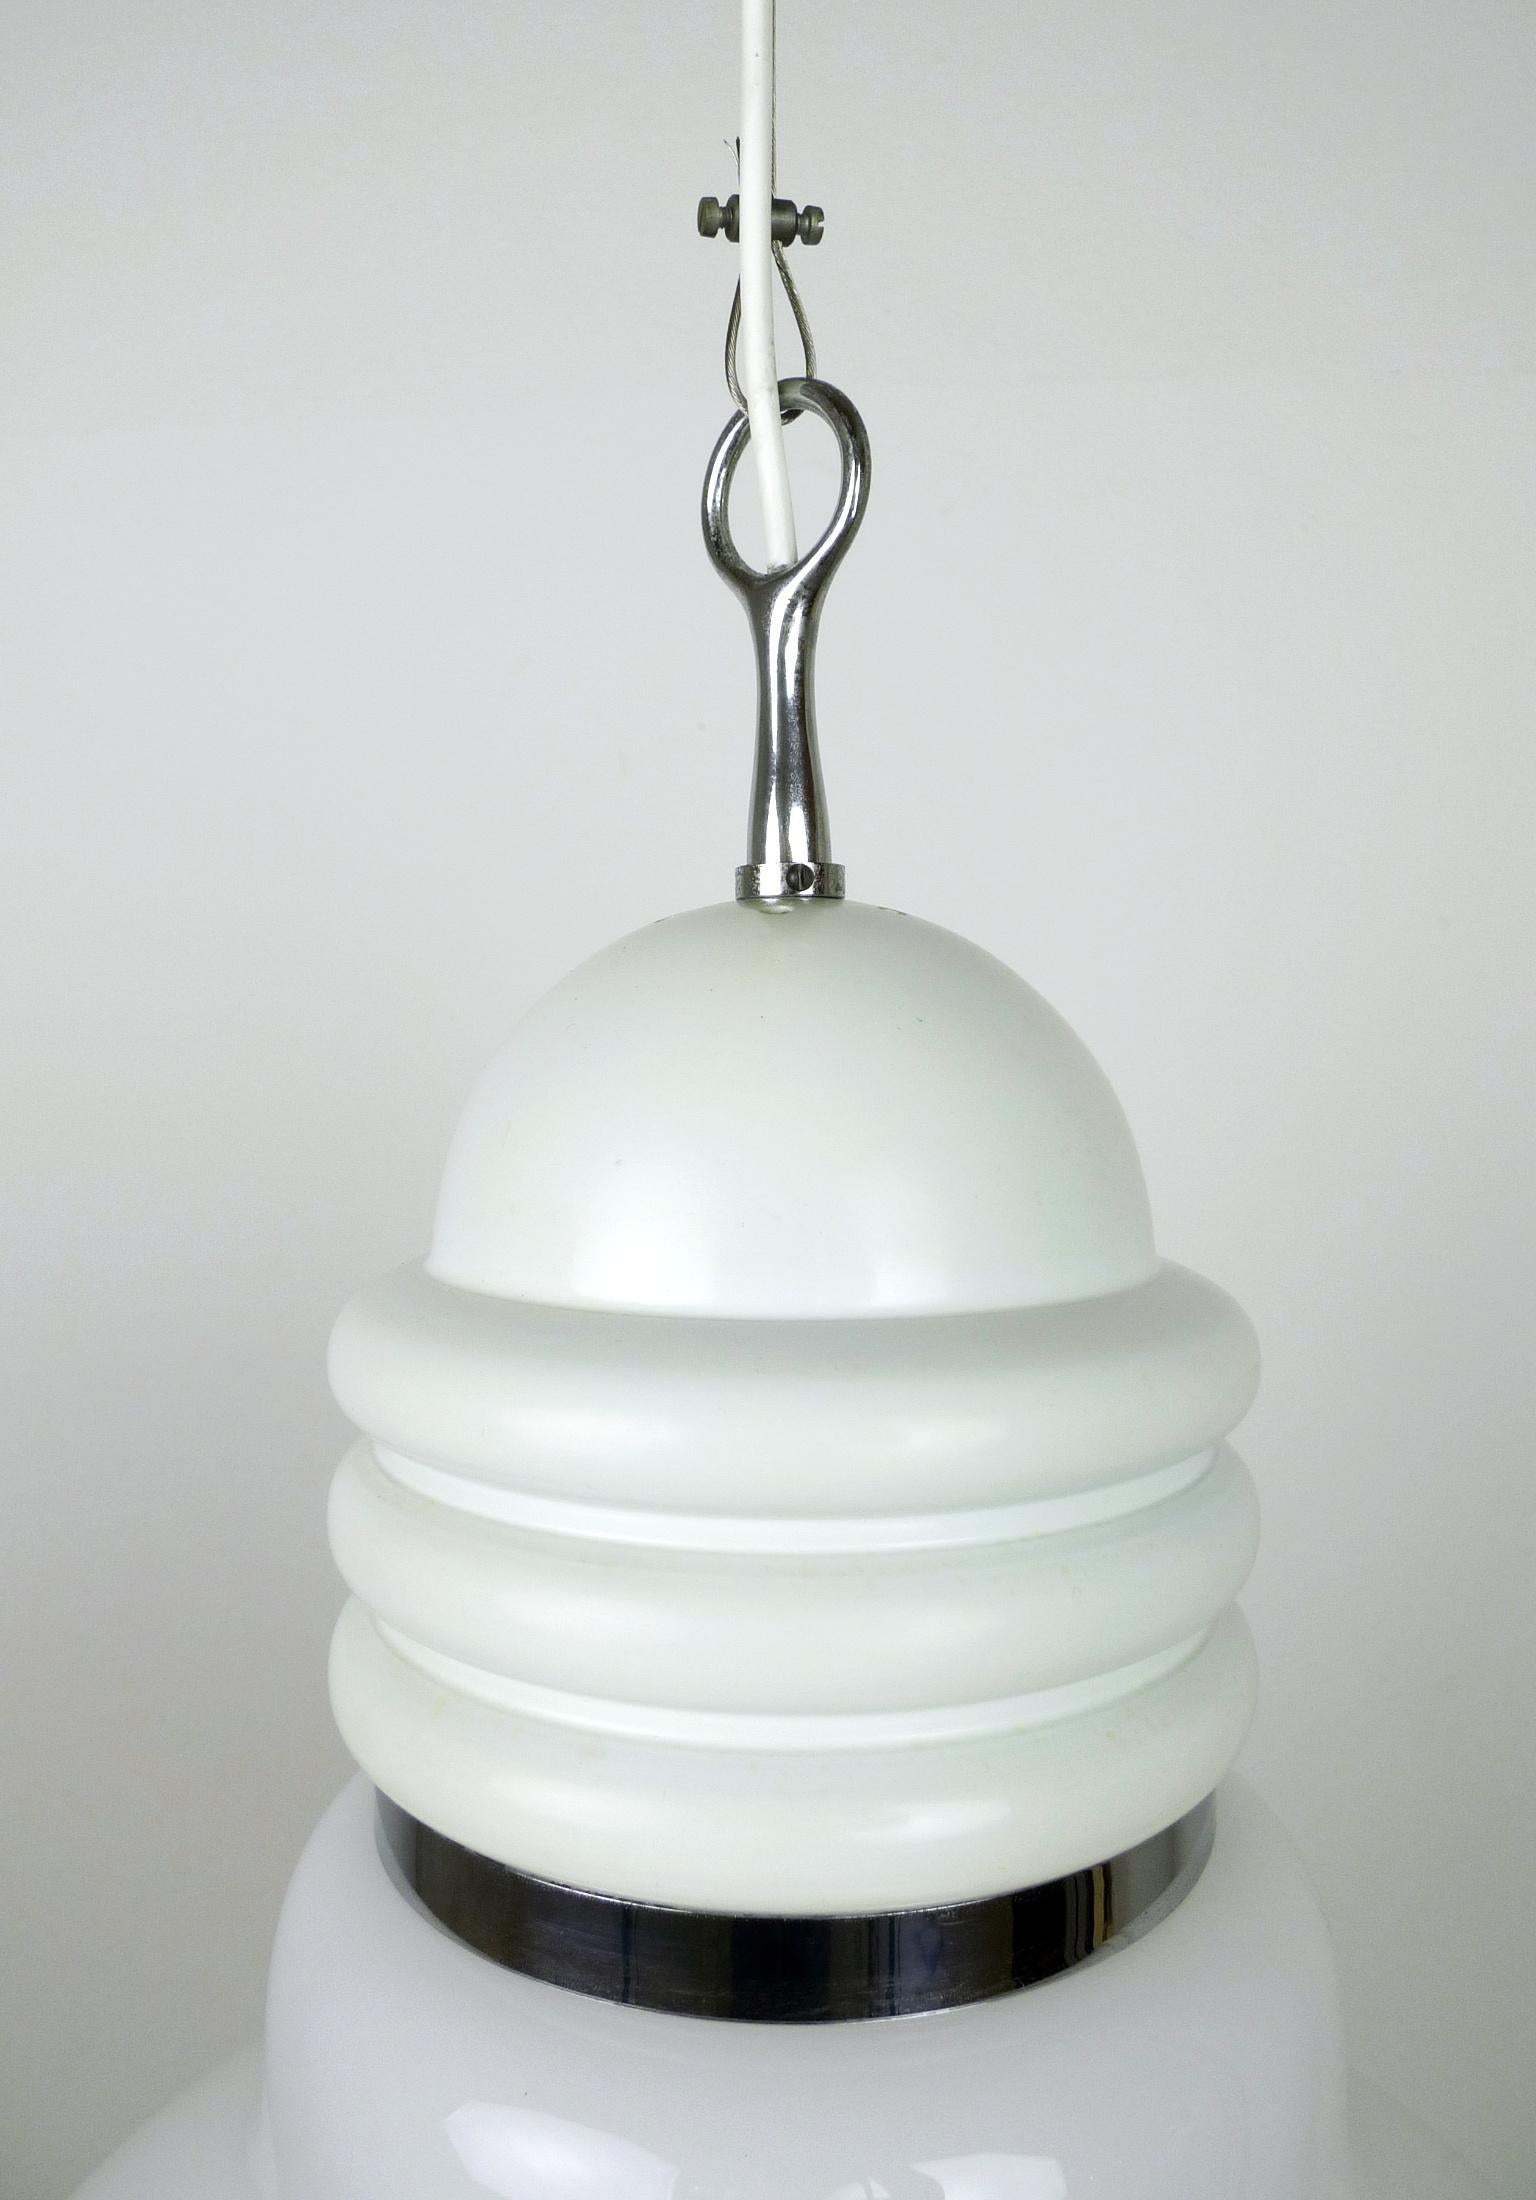 20th Century Arianna Ceiling Light by Della Rocca for Artemide, Italy, 1970s For Sale